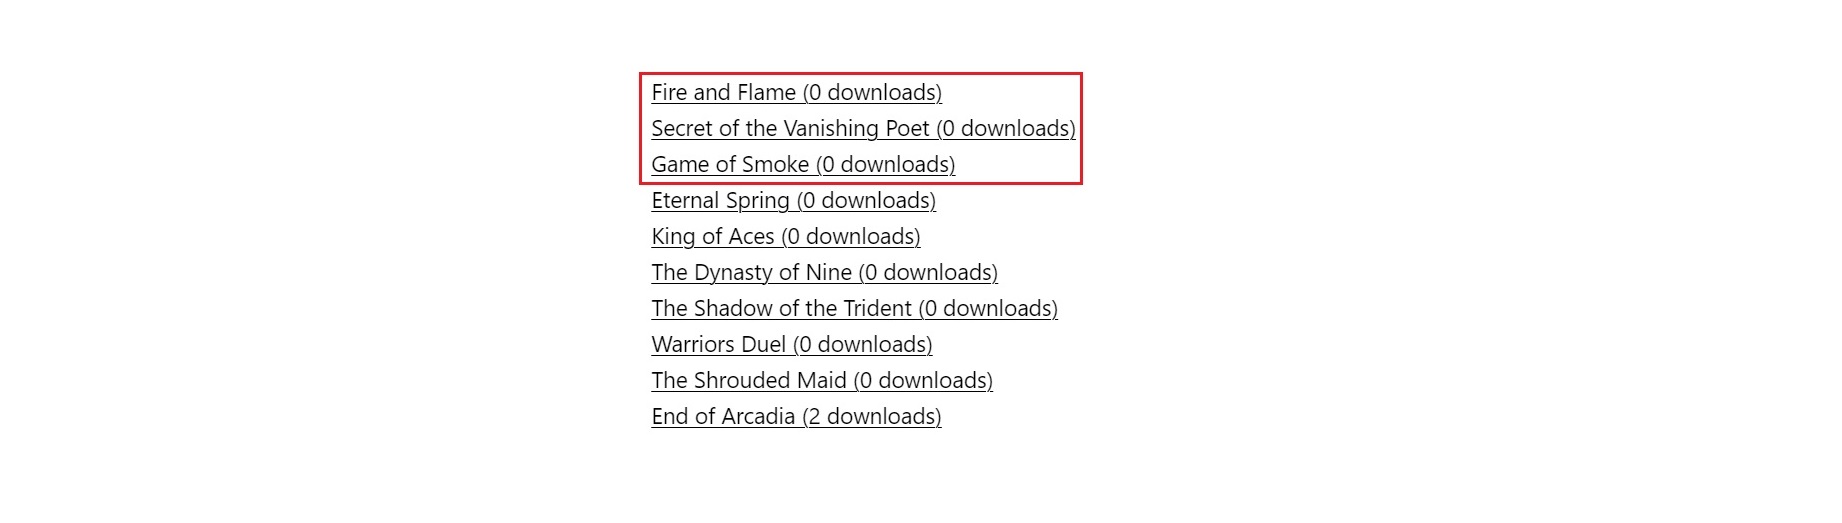 Sorted downloads